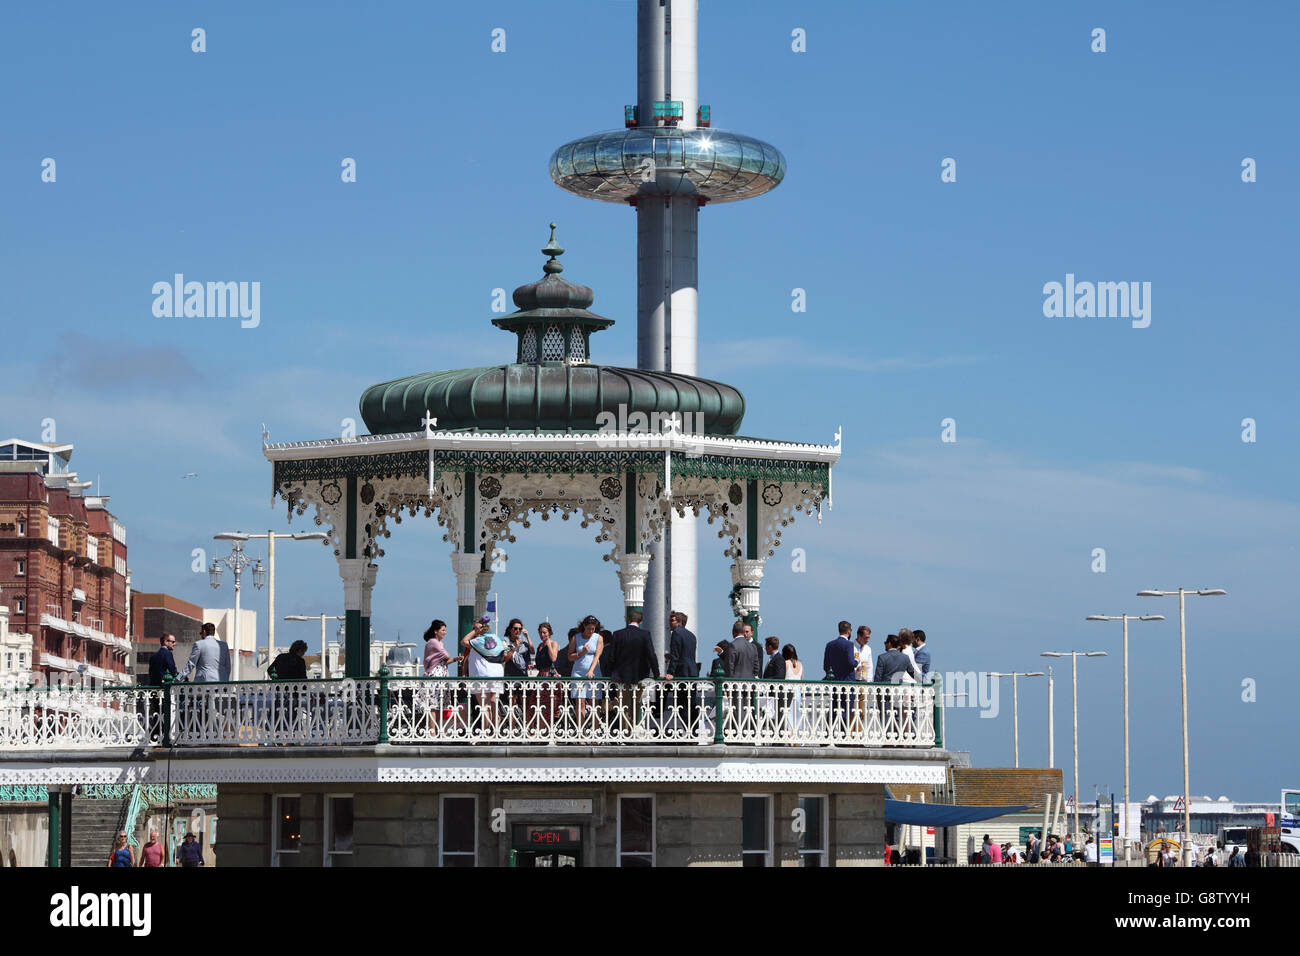 Old and new attractions on Brigton seafront: the old bandstand (with party!) and the new i360 moving observation tower Stock Photo